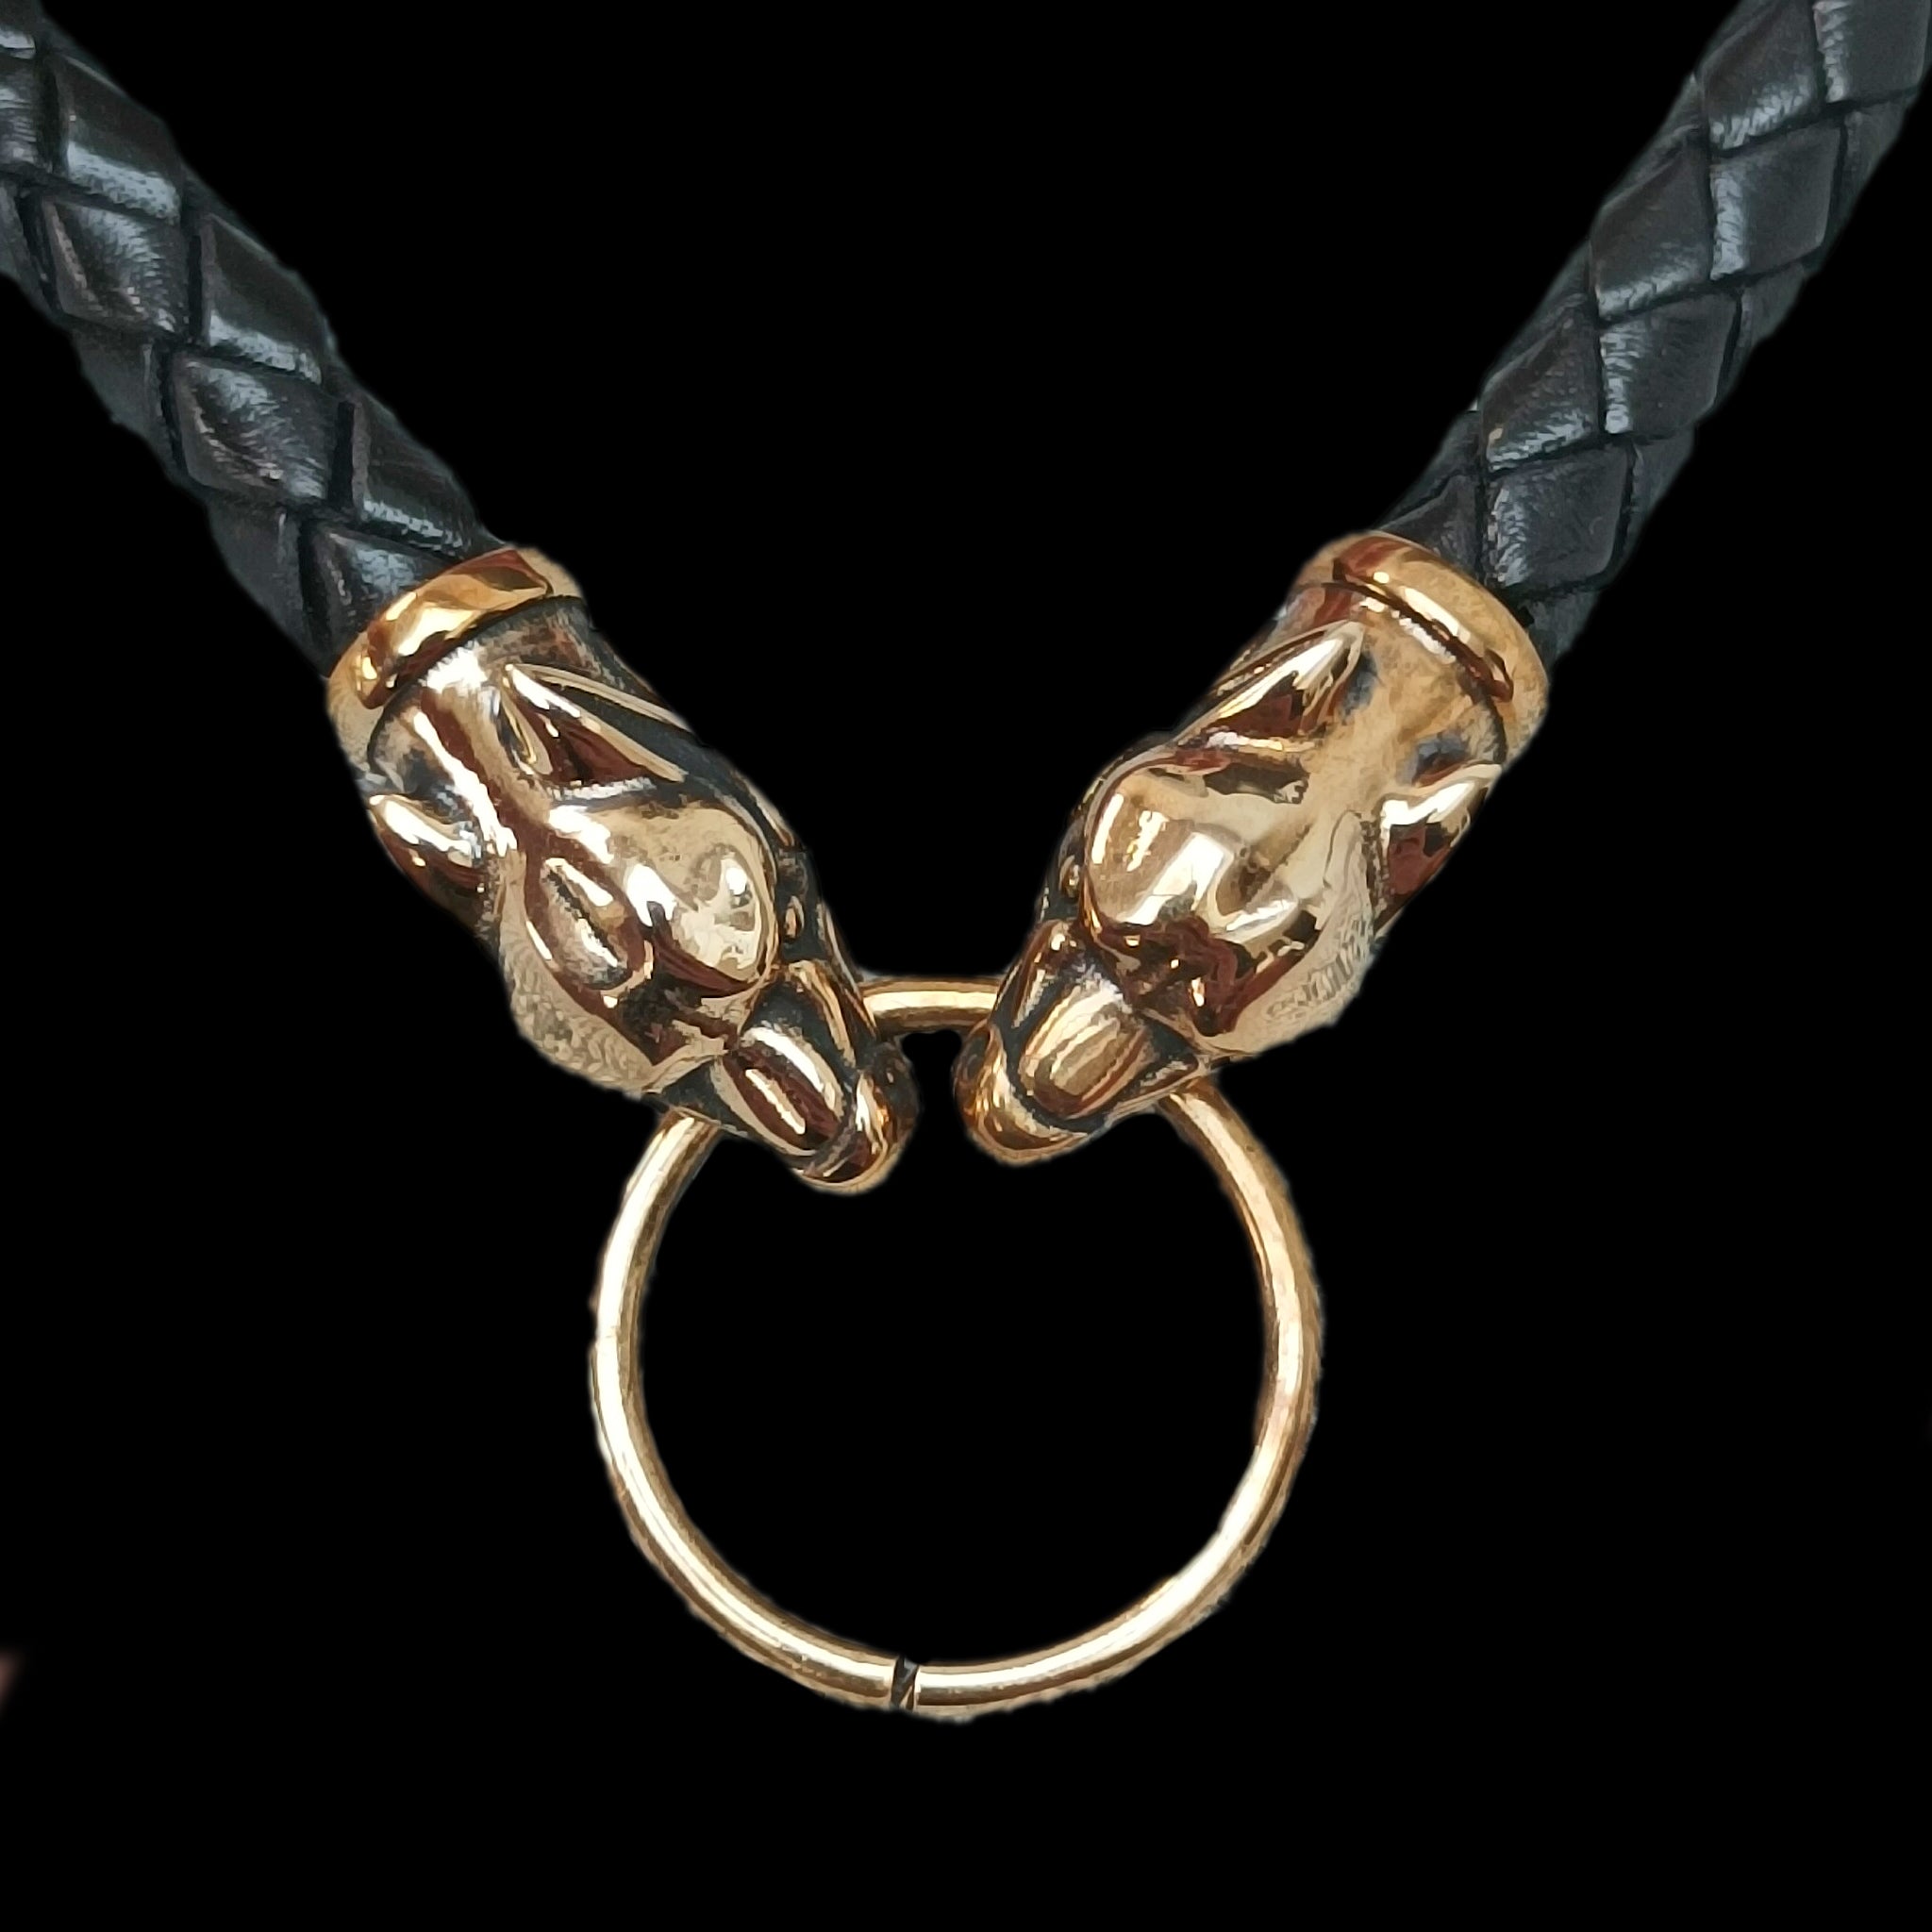 8mm Width Braided Leather Necklace with Bronze Ferocious Wolf Heads and Split Ring